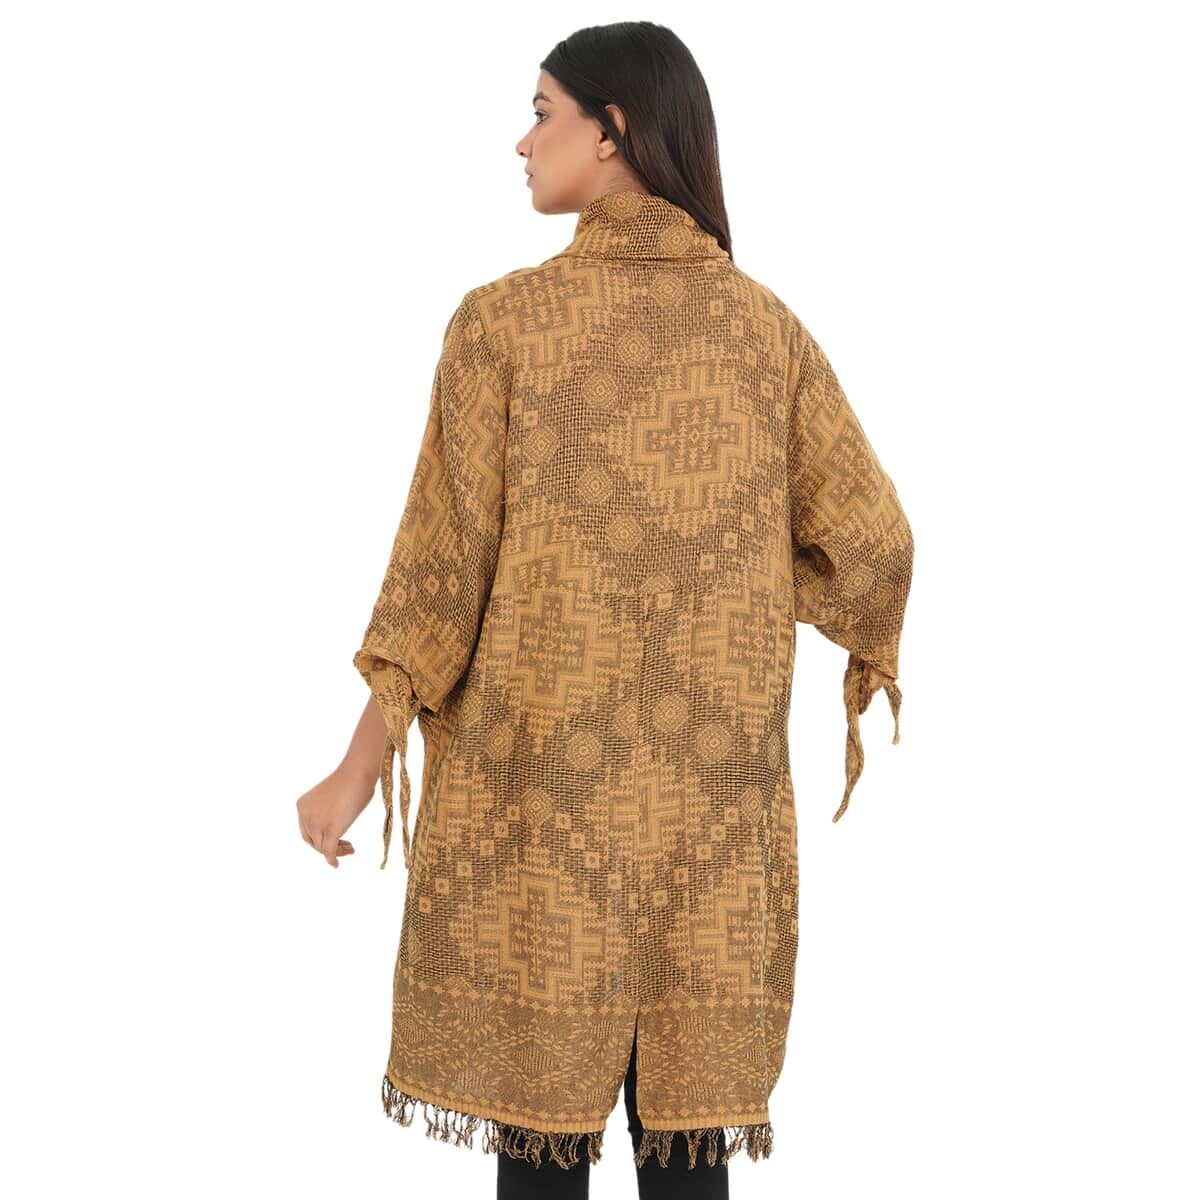 TAMSY Gold 100% Cotton Double Layer Jacquard Waterfall Front Cardigan - One Size Missy (35"x24") image number 1